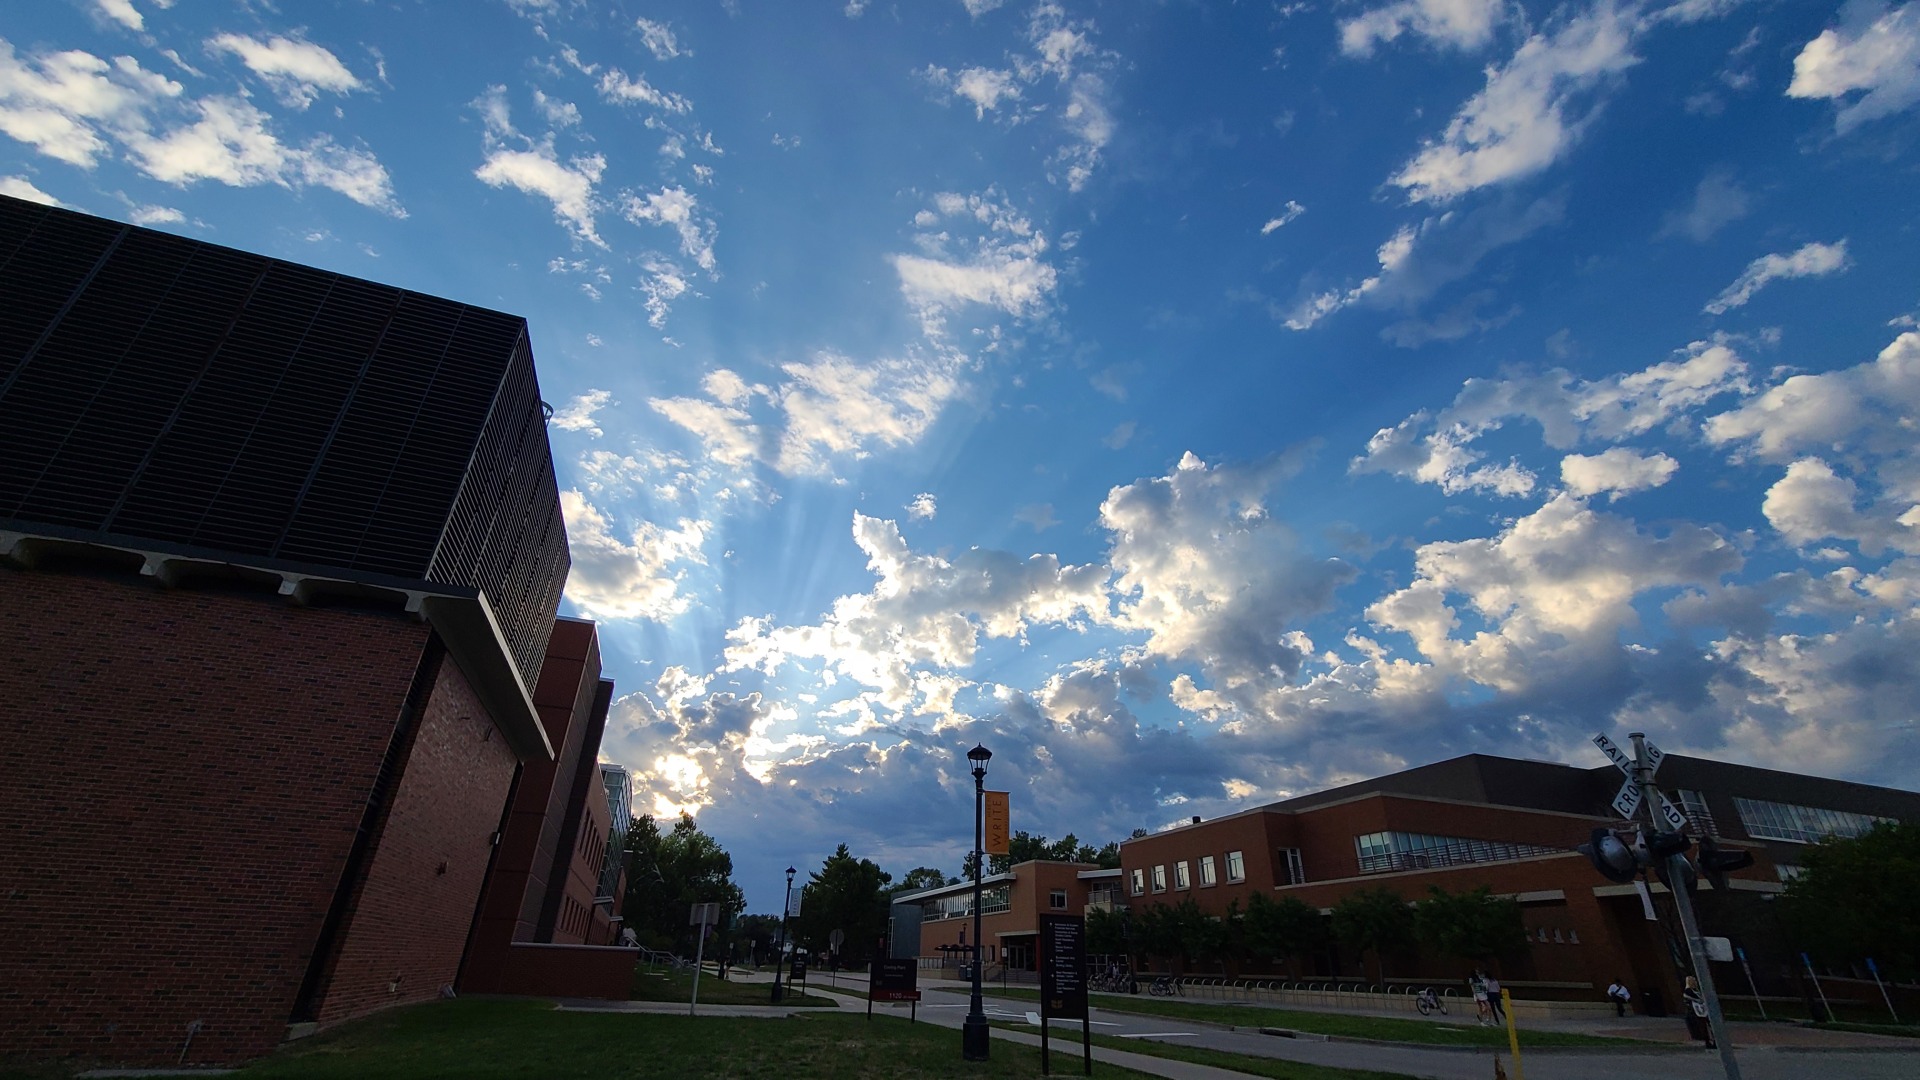 Clouds part the beautiful warm sunlight next to the Noyce science building